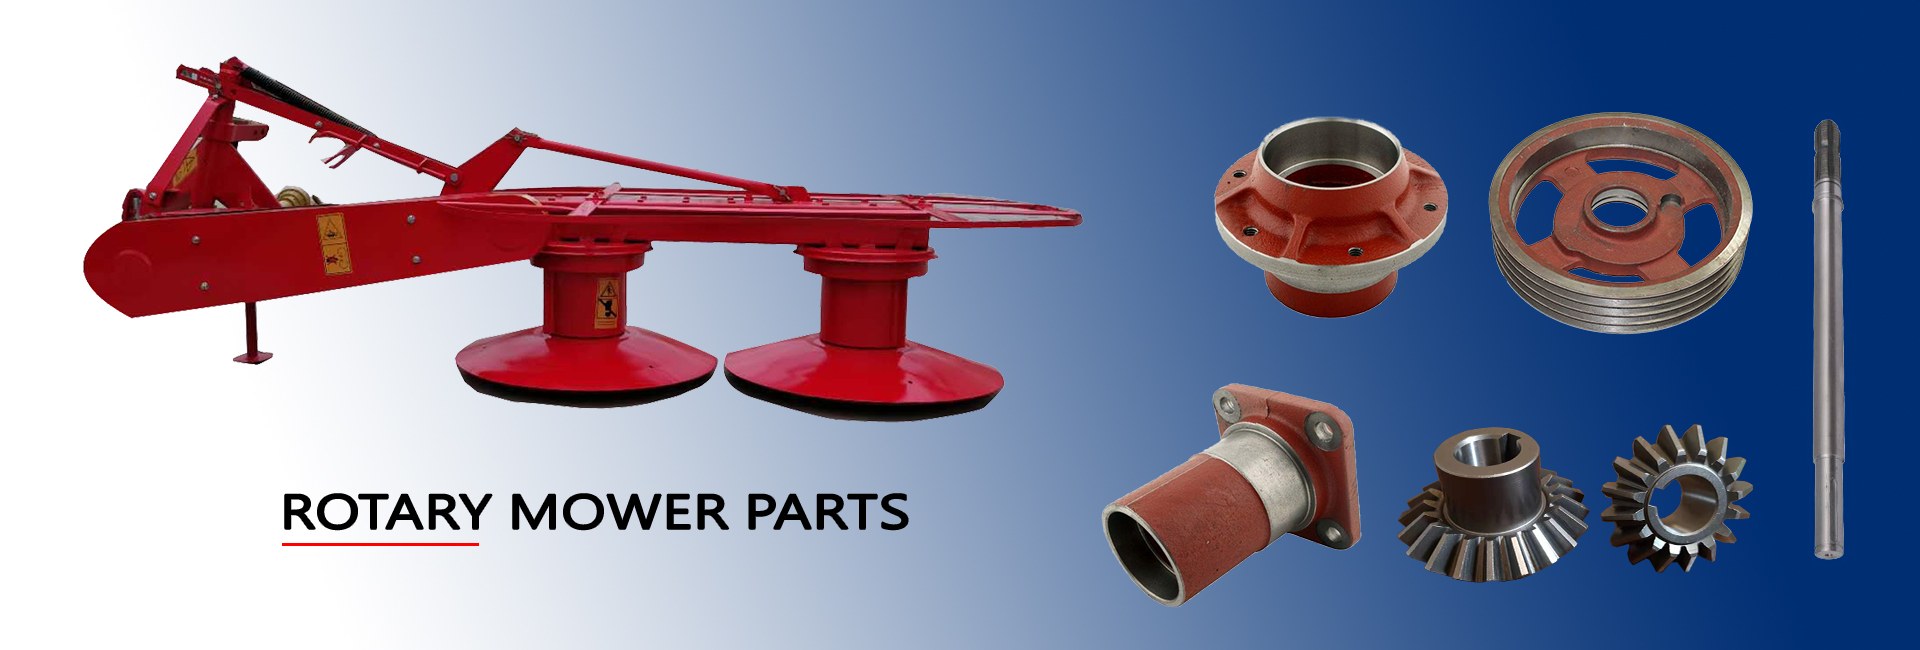 Rotary Mower Parts Z-069